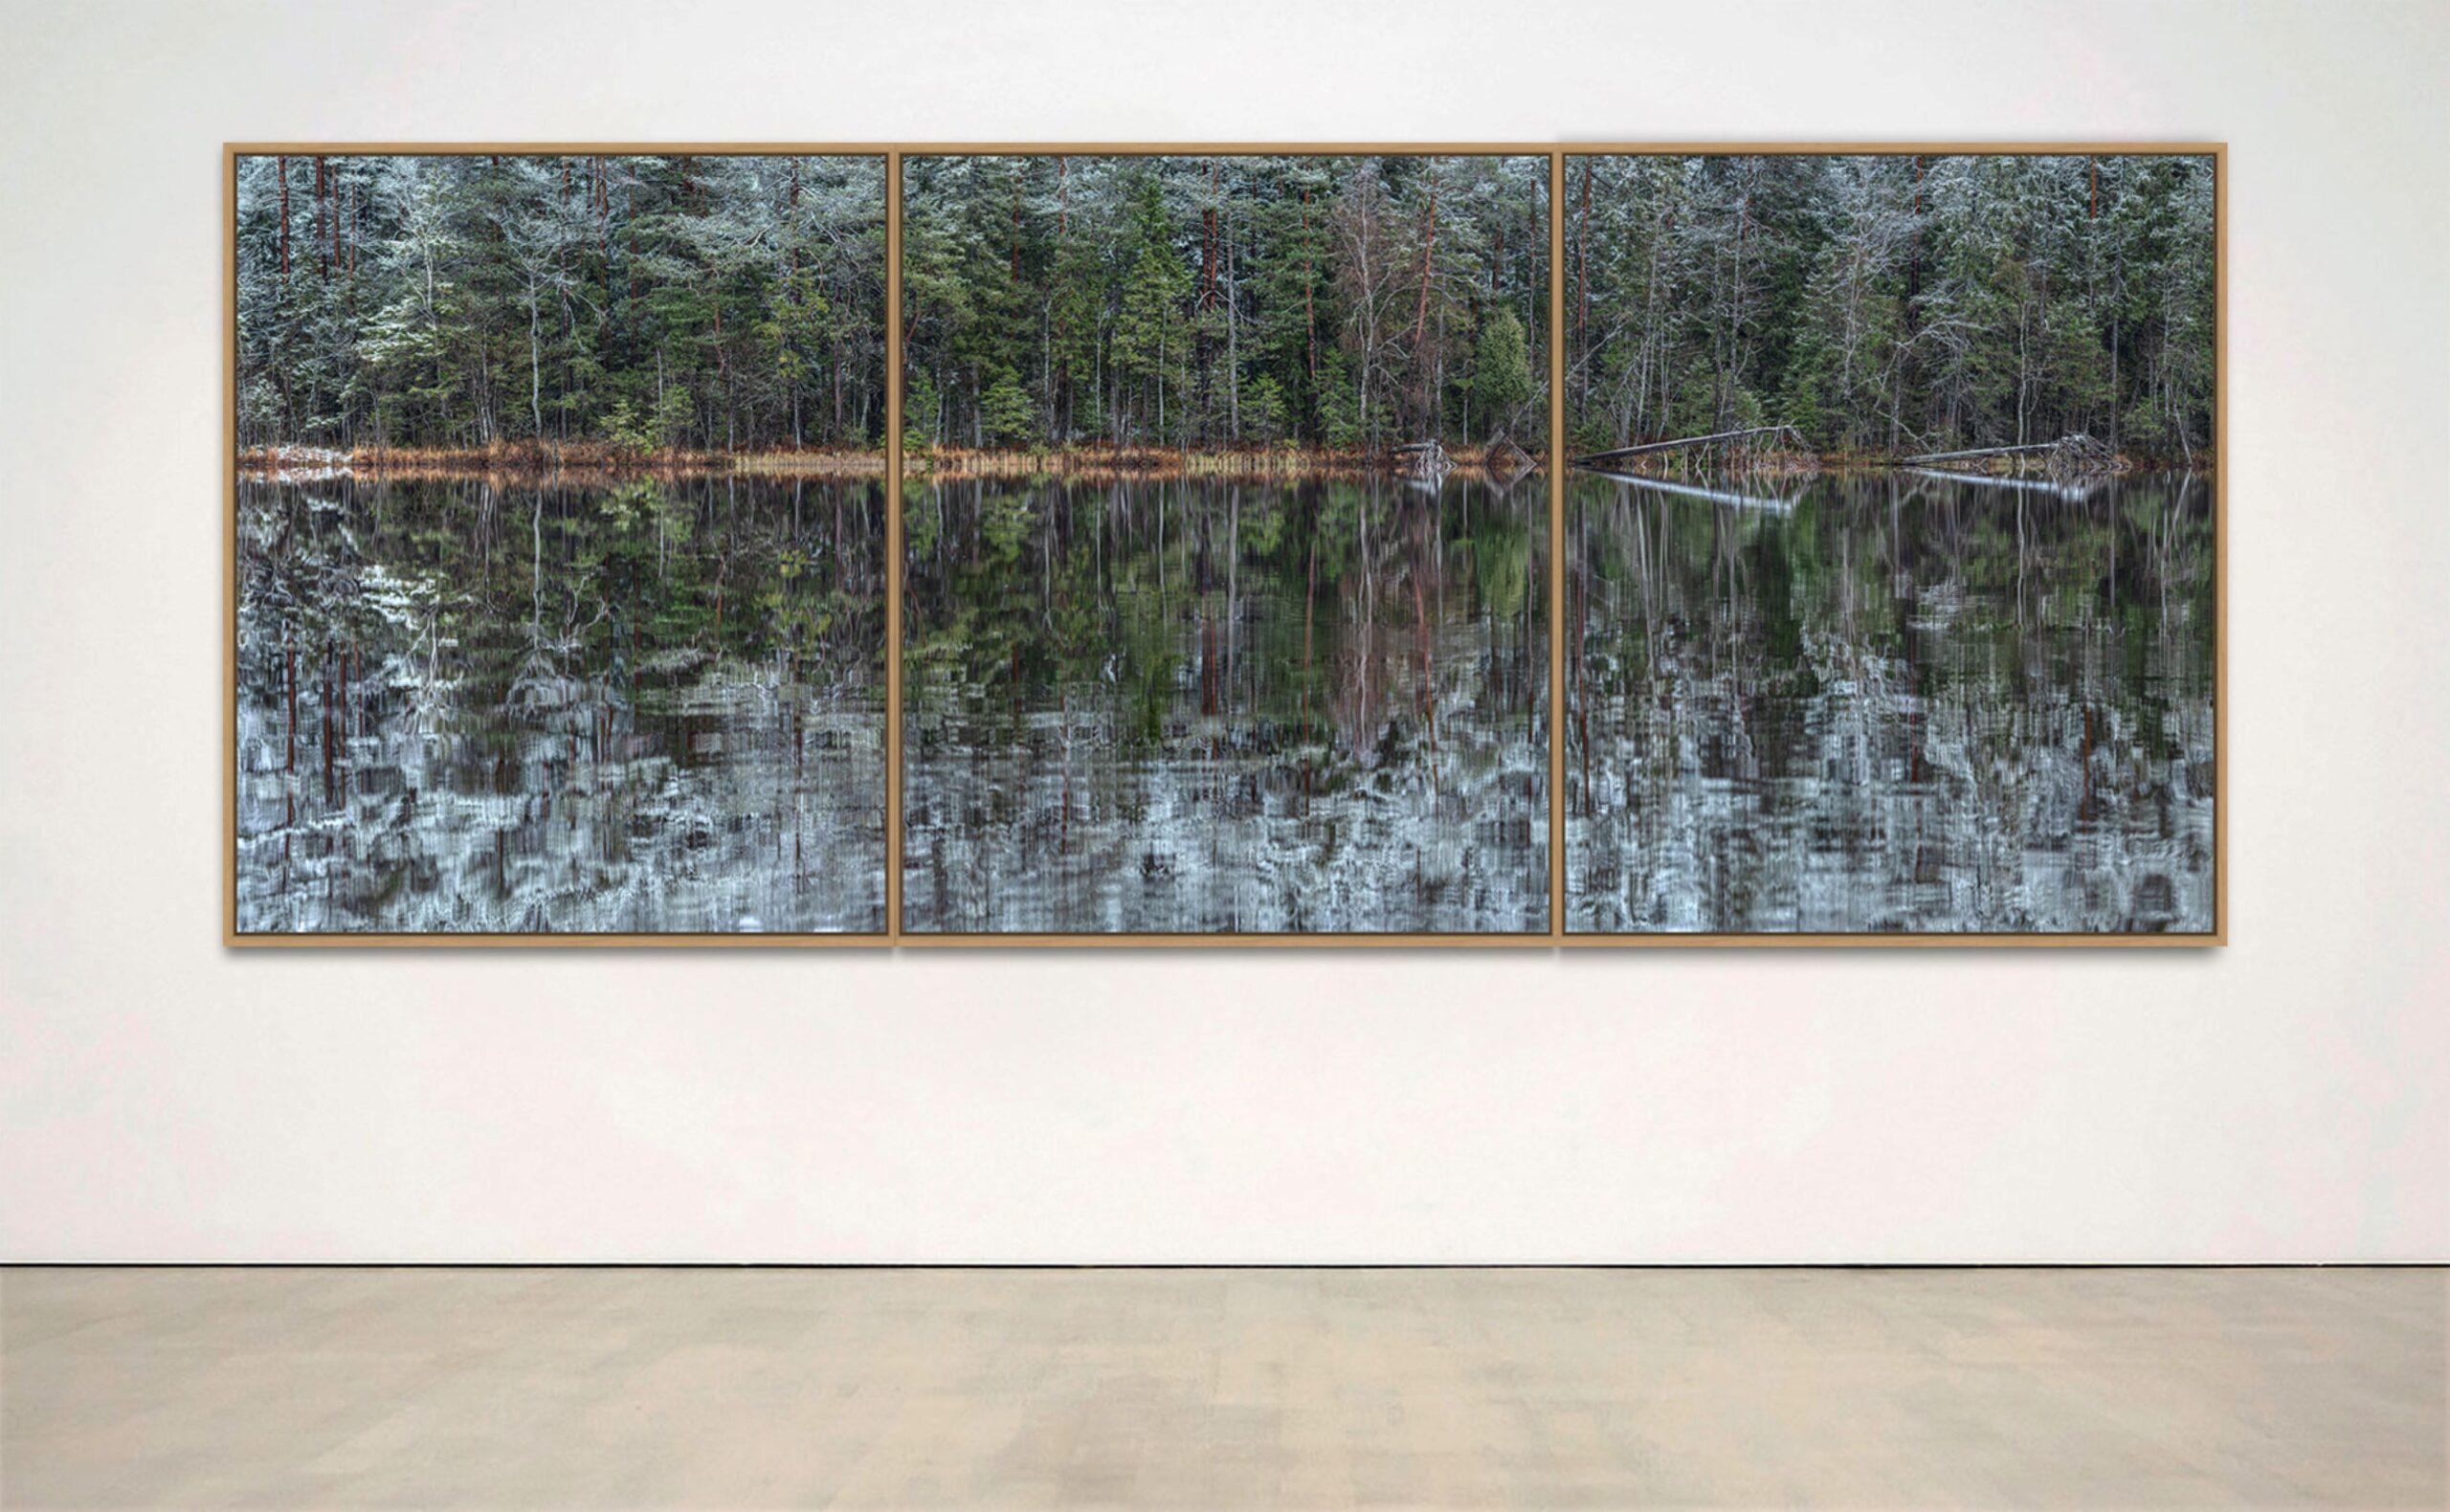 Deep Mirroring Forest 001 by Bernhard Lang - Landscape photography, trees, green For Sale 2